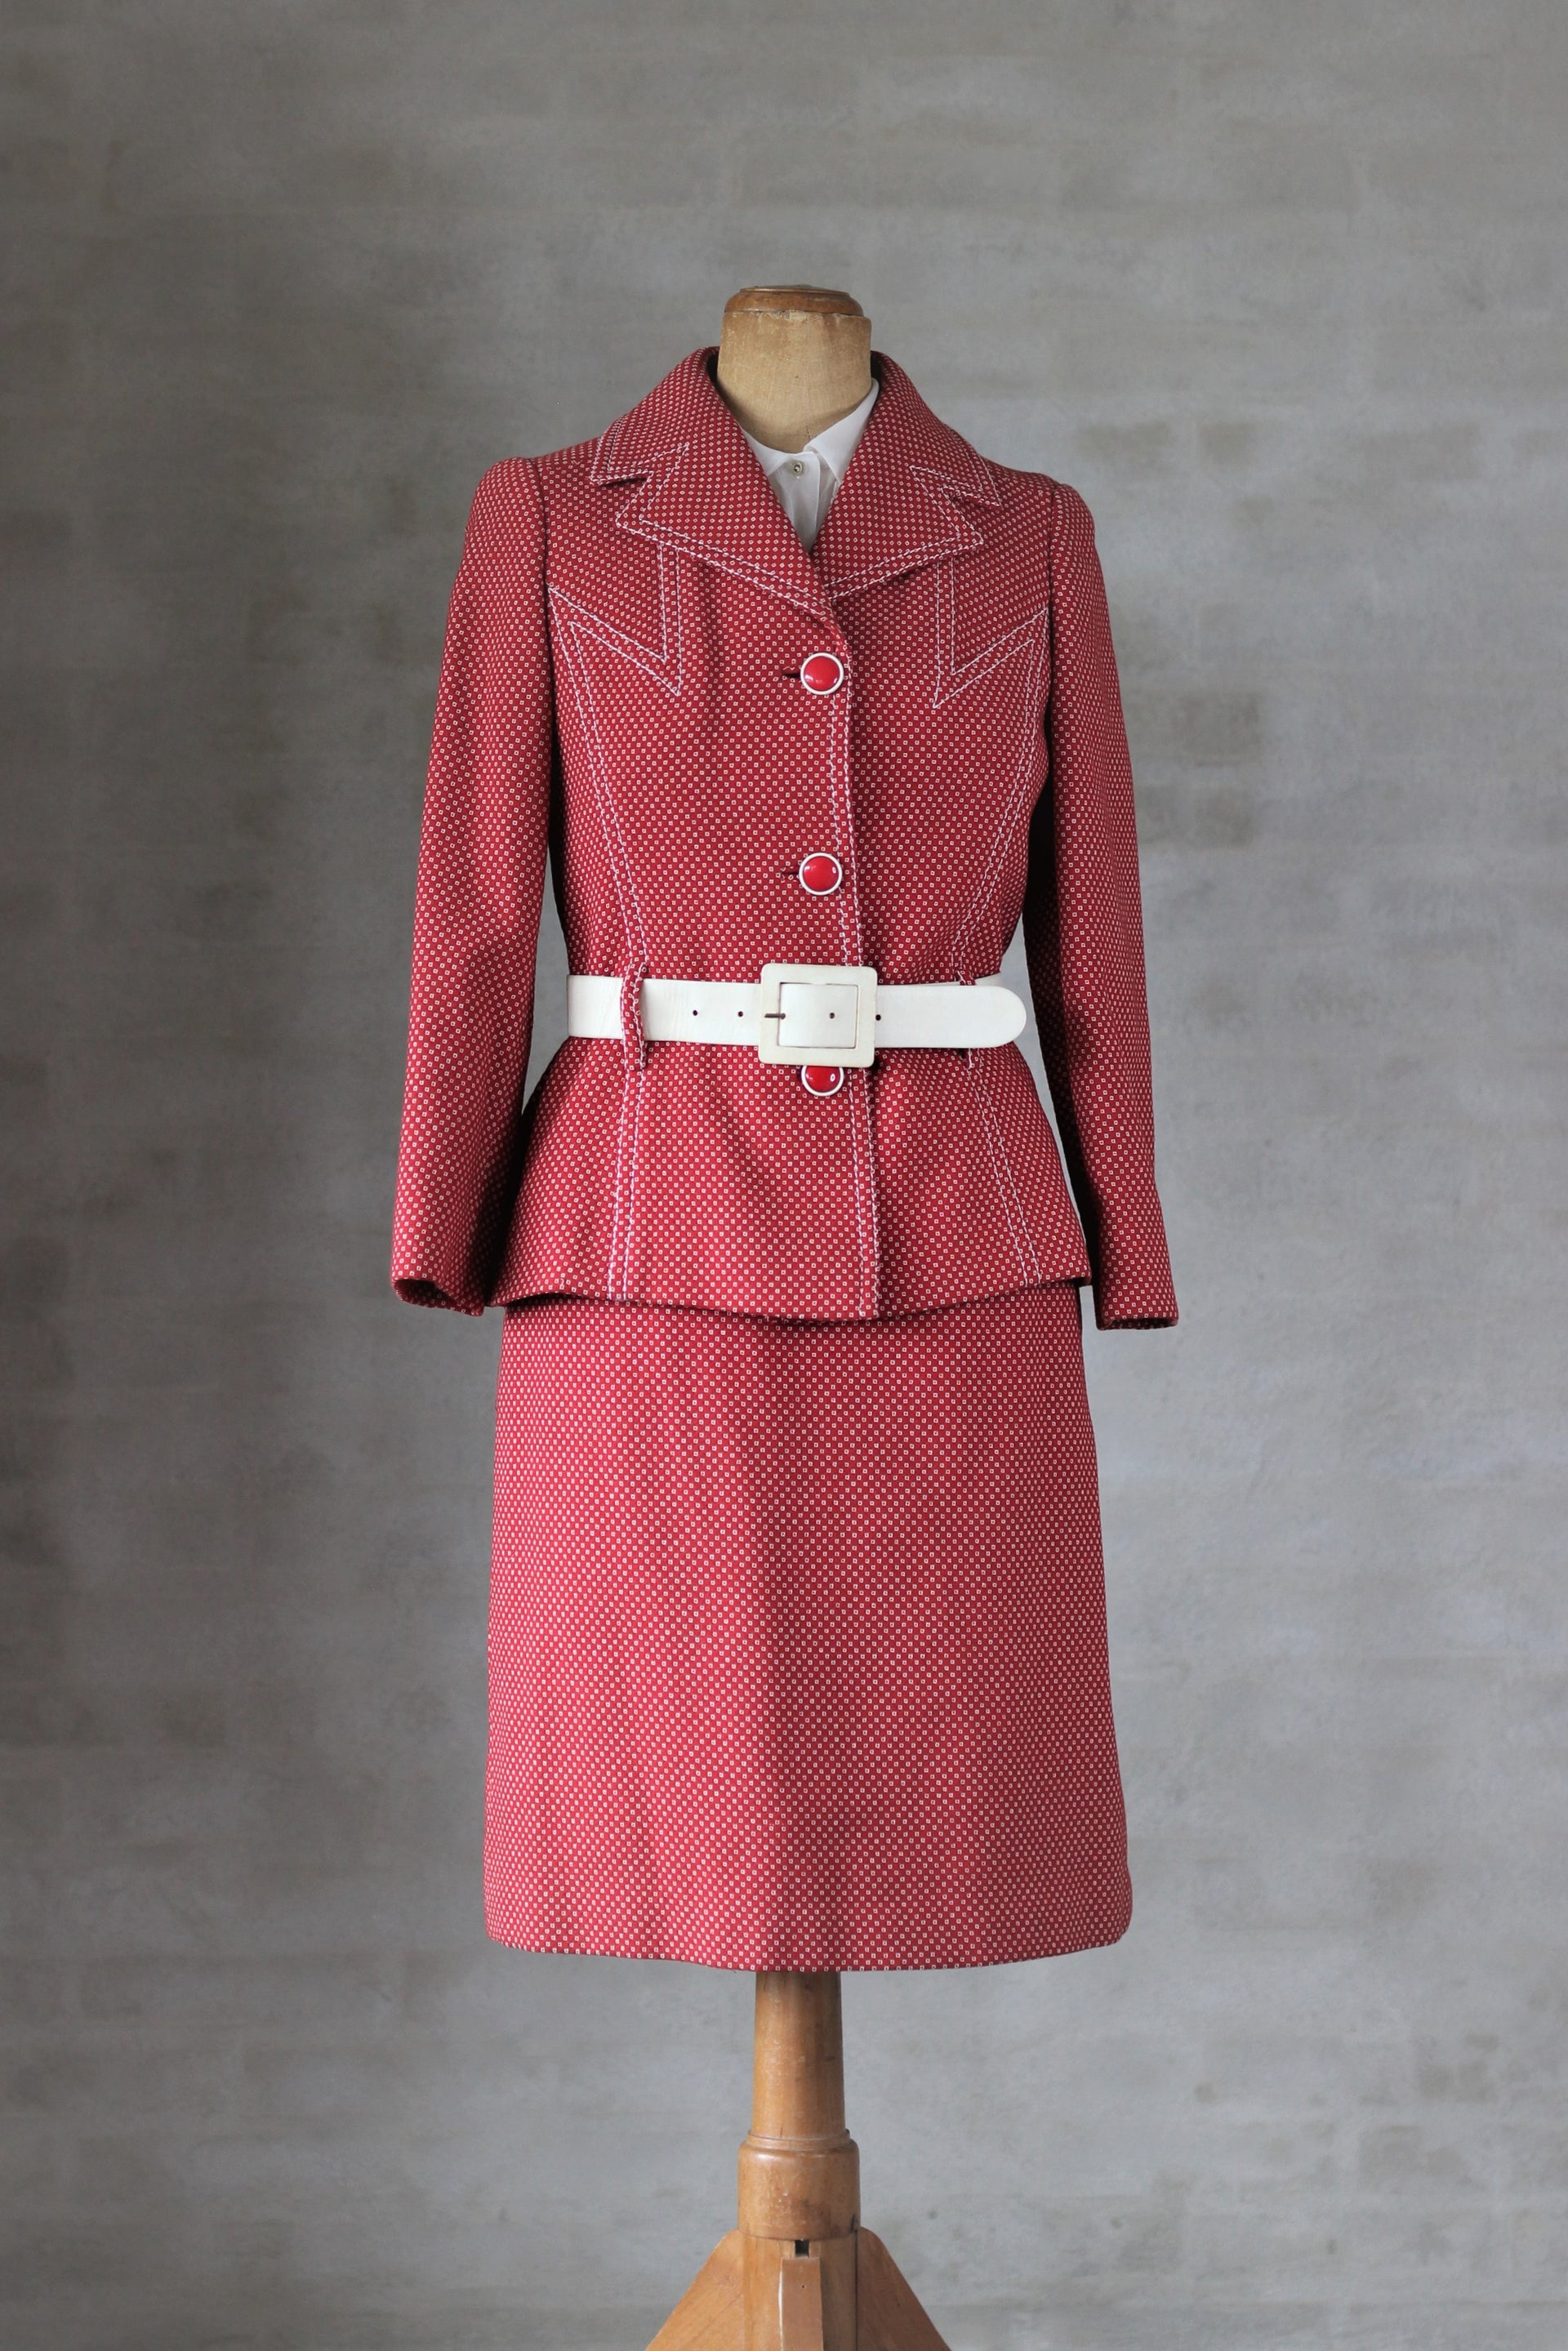 1960s/1970s Deadstock Italian Red Wool Skirt Suit with Belt//Size S/M